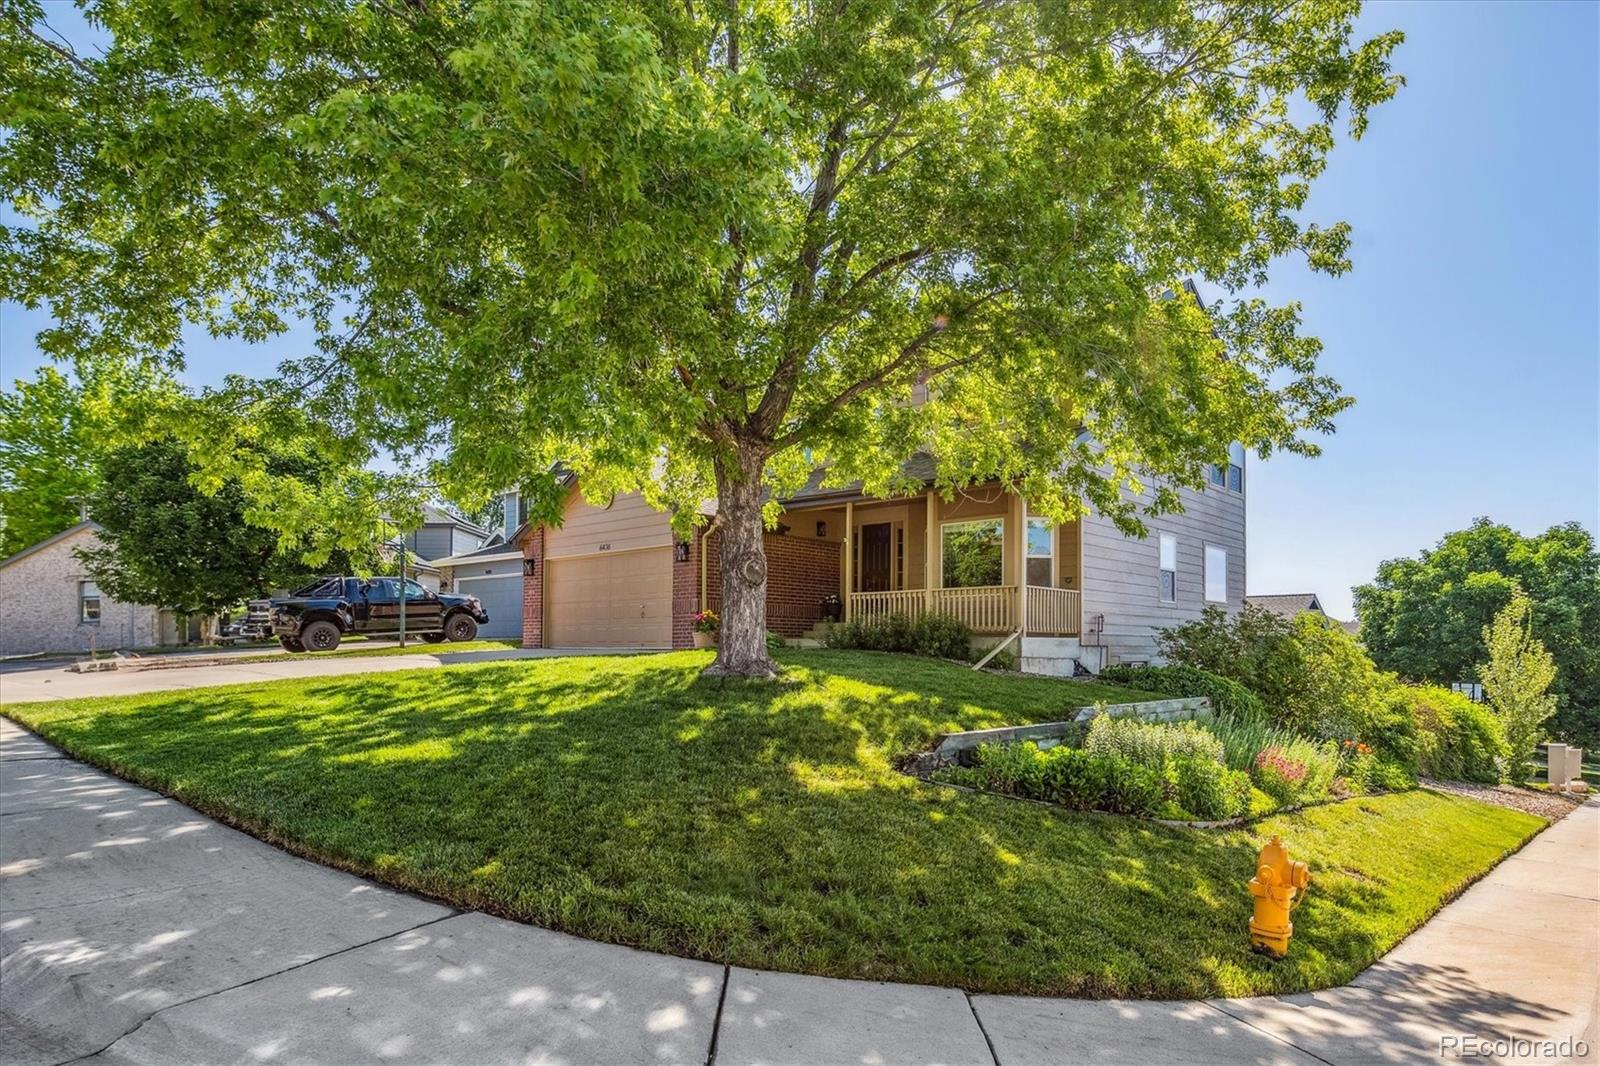 Report Image for 6436 S Urban Court,Littleton, Colorado